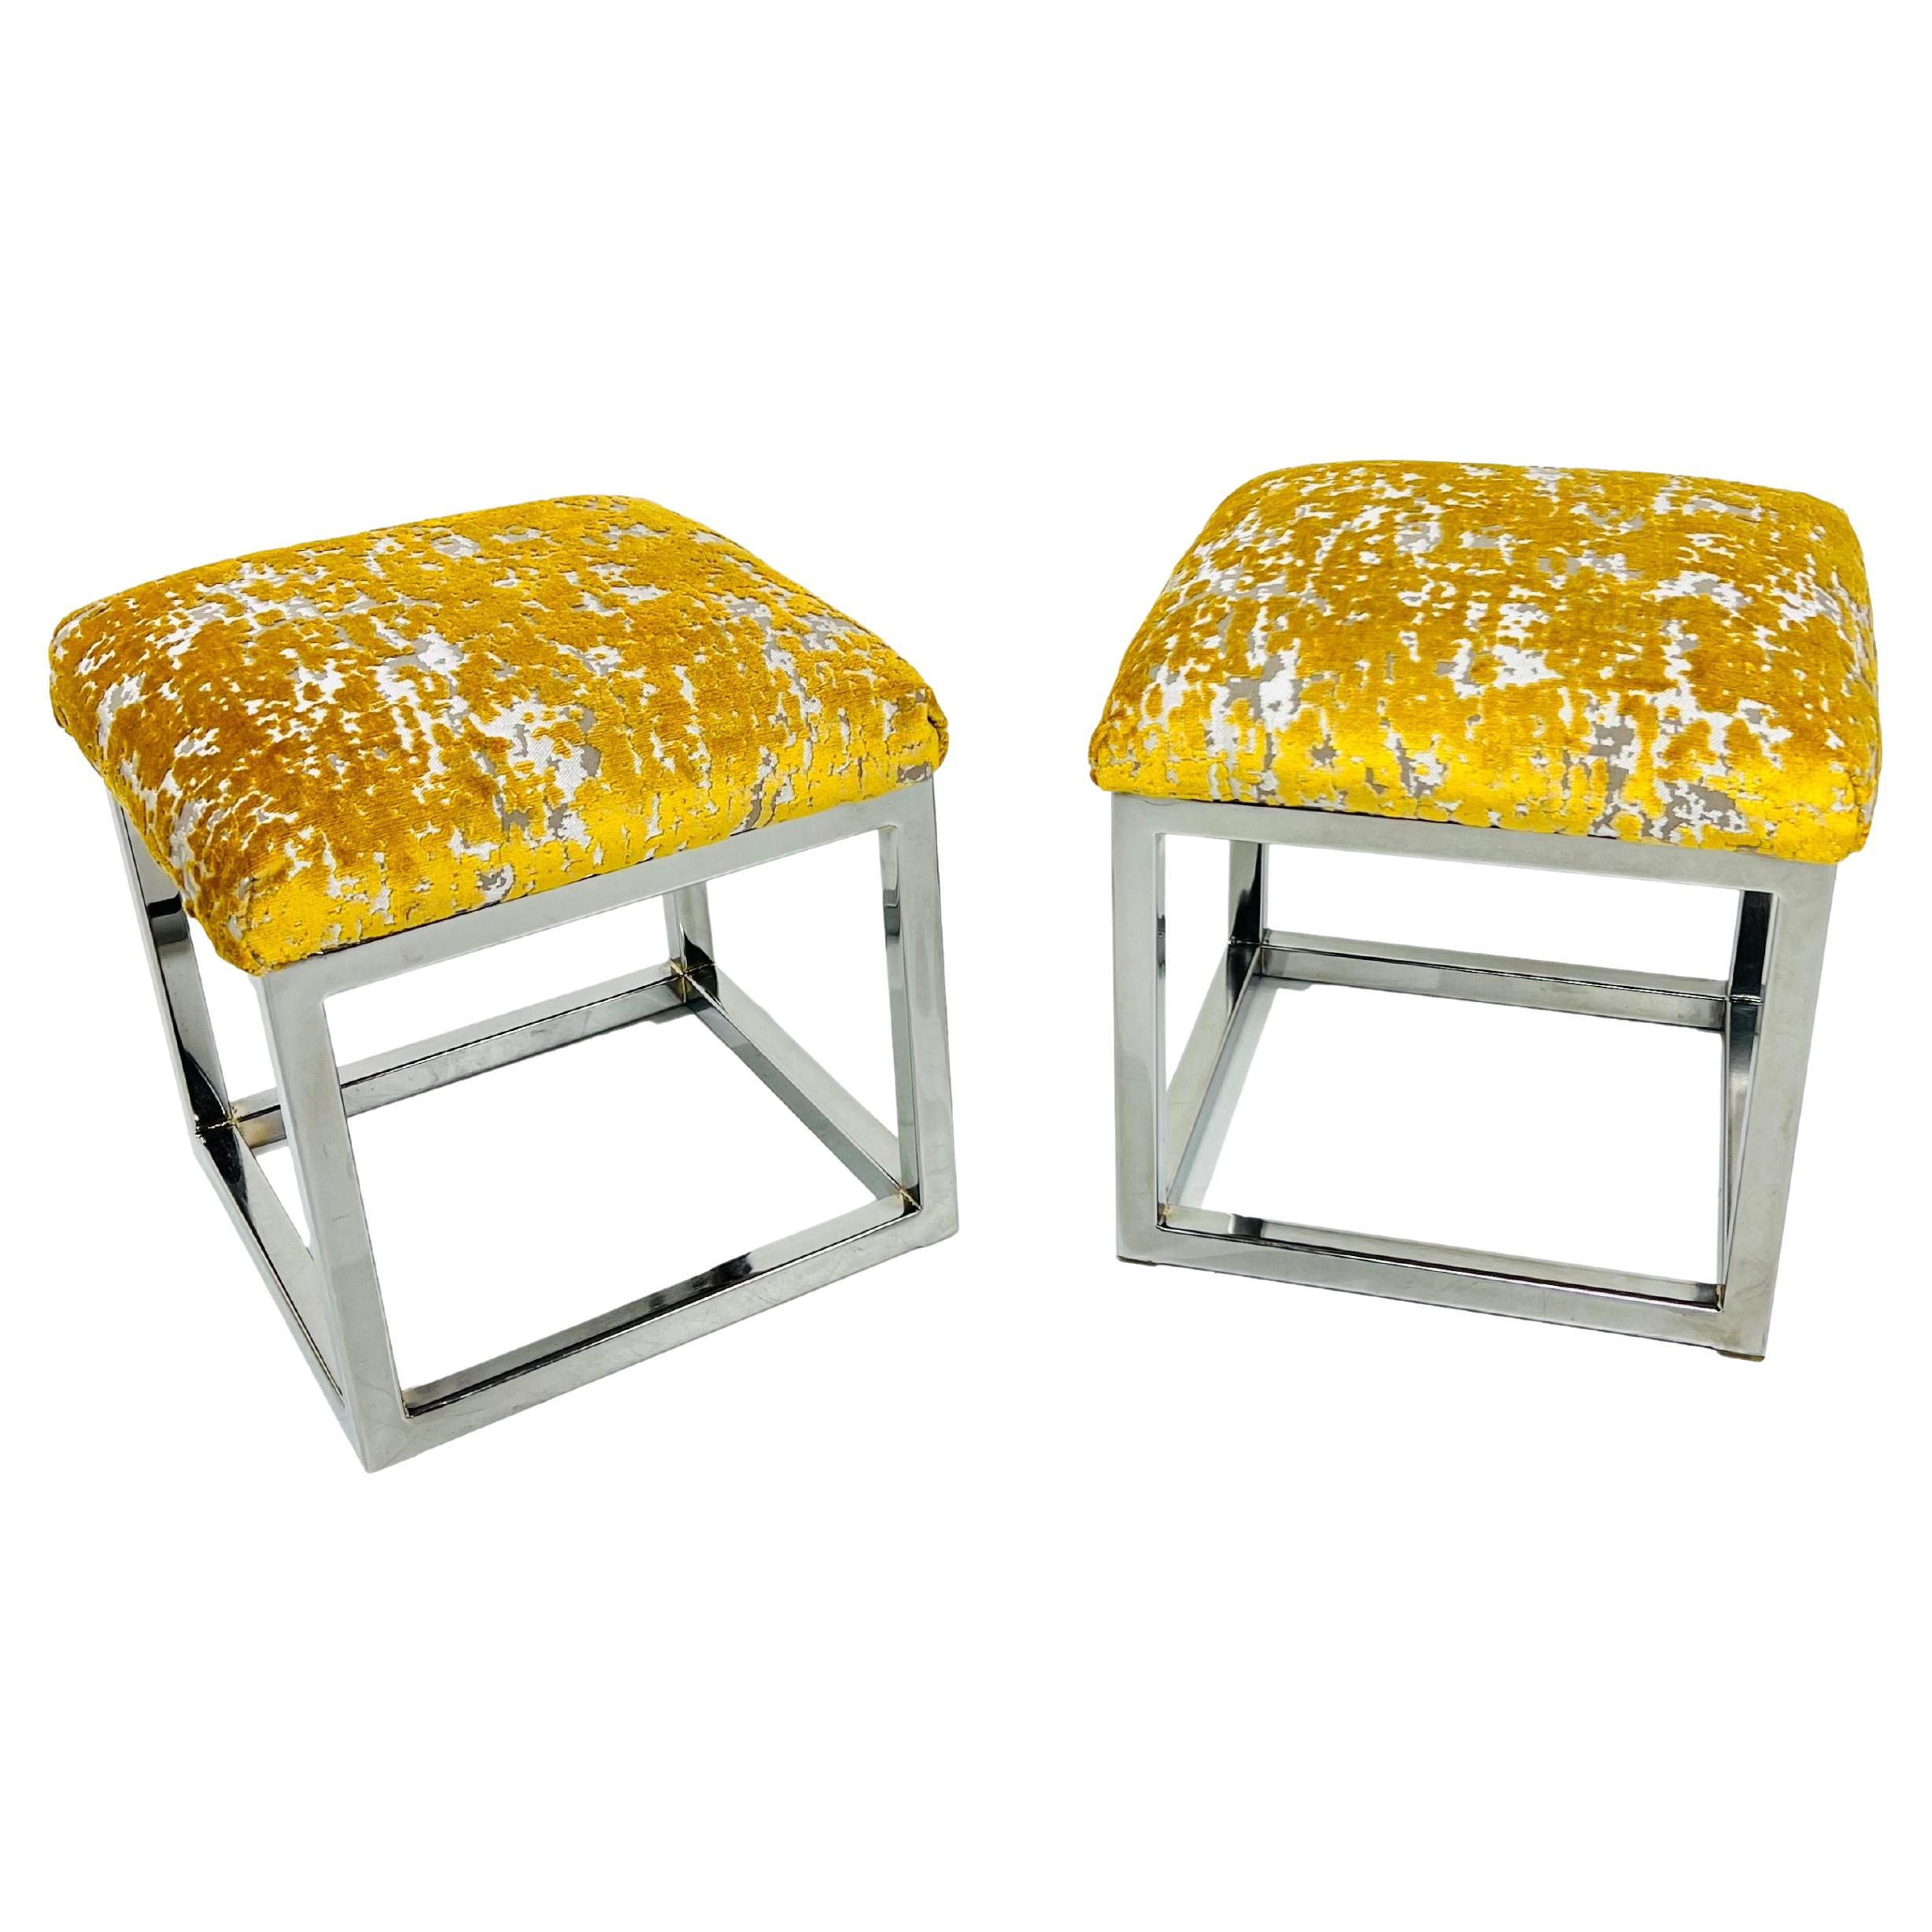 Pair of Vintage Chrome Frame Footstools / Ottomans For Sale